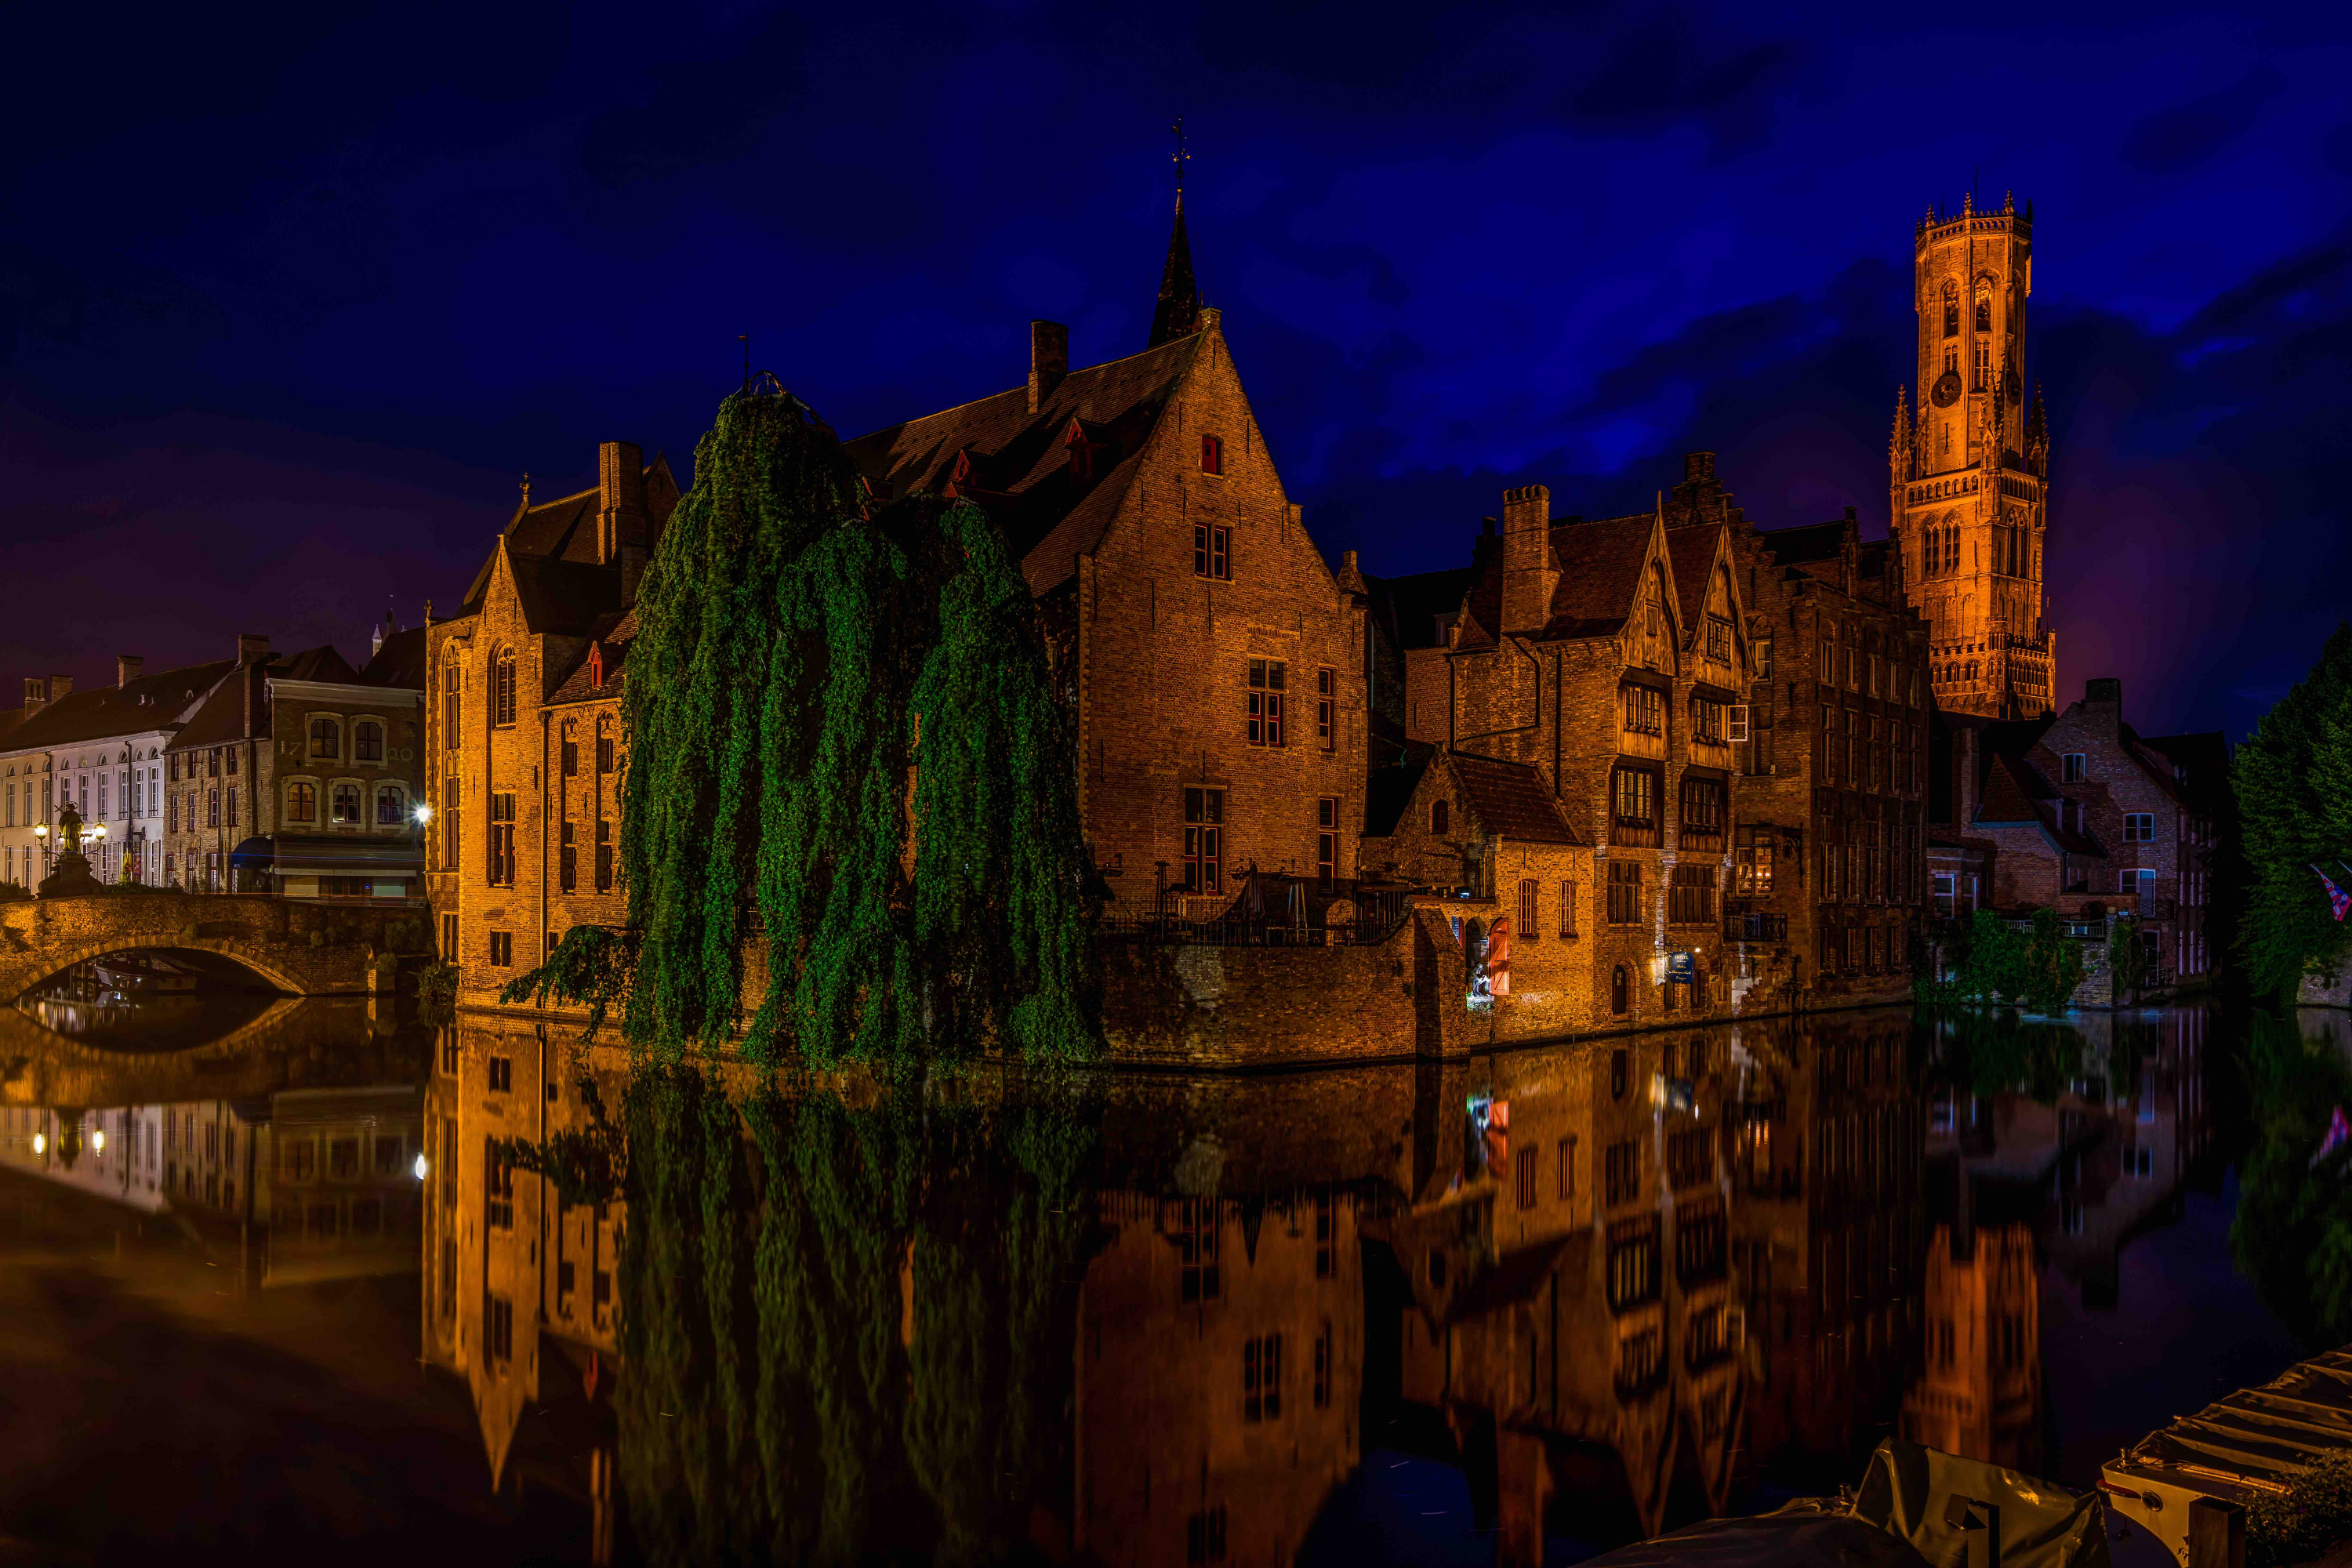 belgium, man made, bruges, building, canal, night, reflection, towns